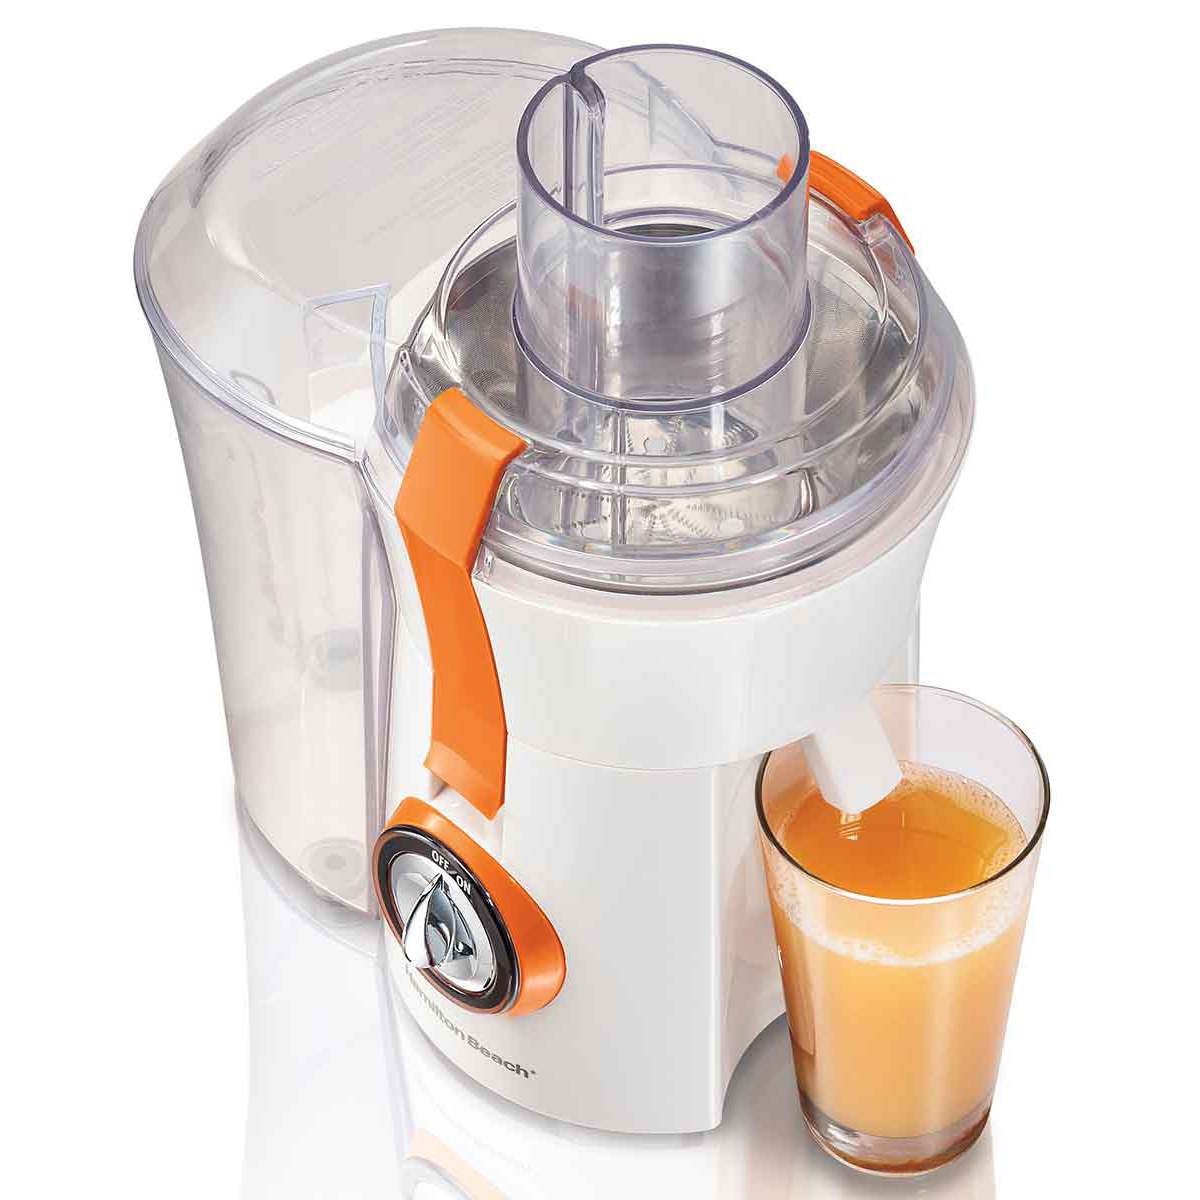 Big Mouth® Juice Extractor (67603)